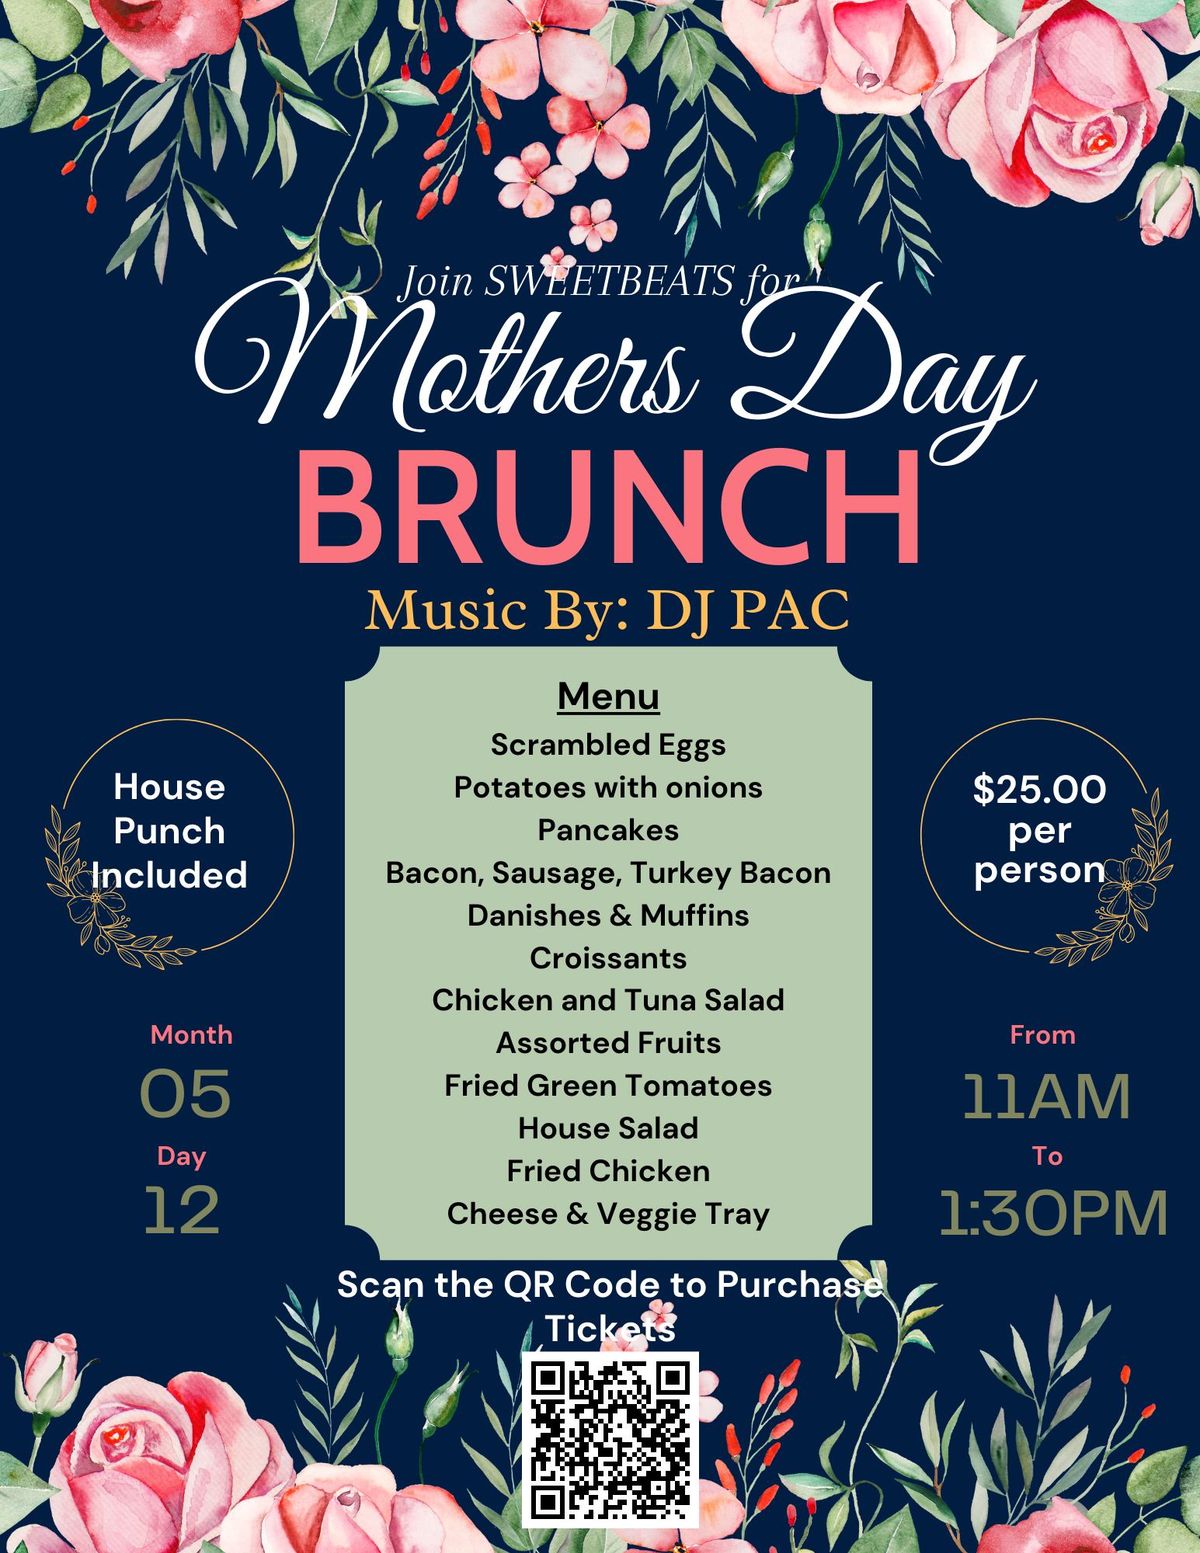 SWEETBEATS PRESENTS: MOTHERS DAY BRUNCH